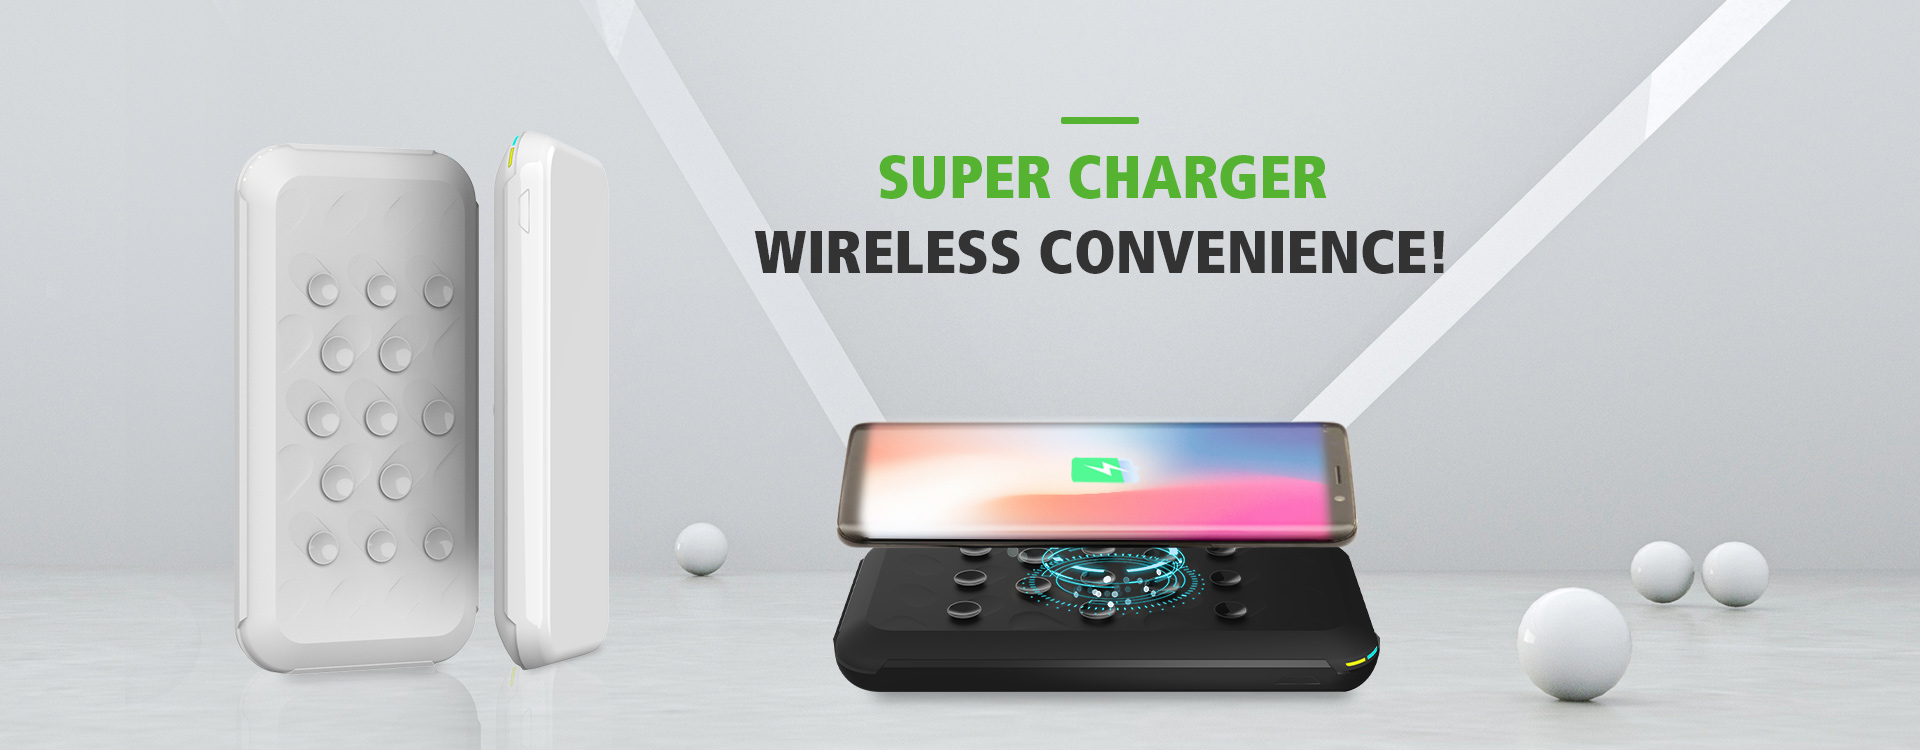 what is the best wireless charger for iphone x